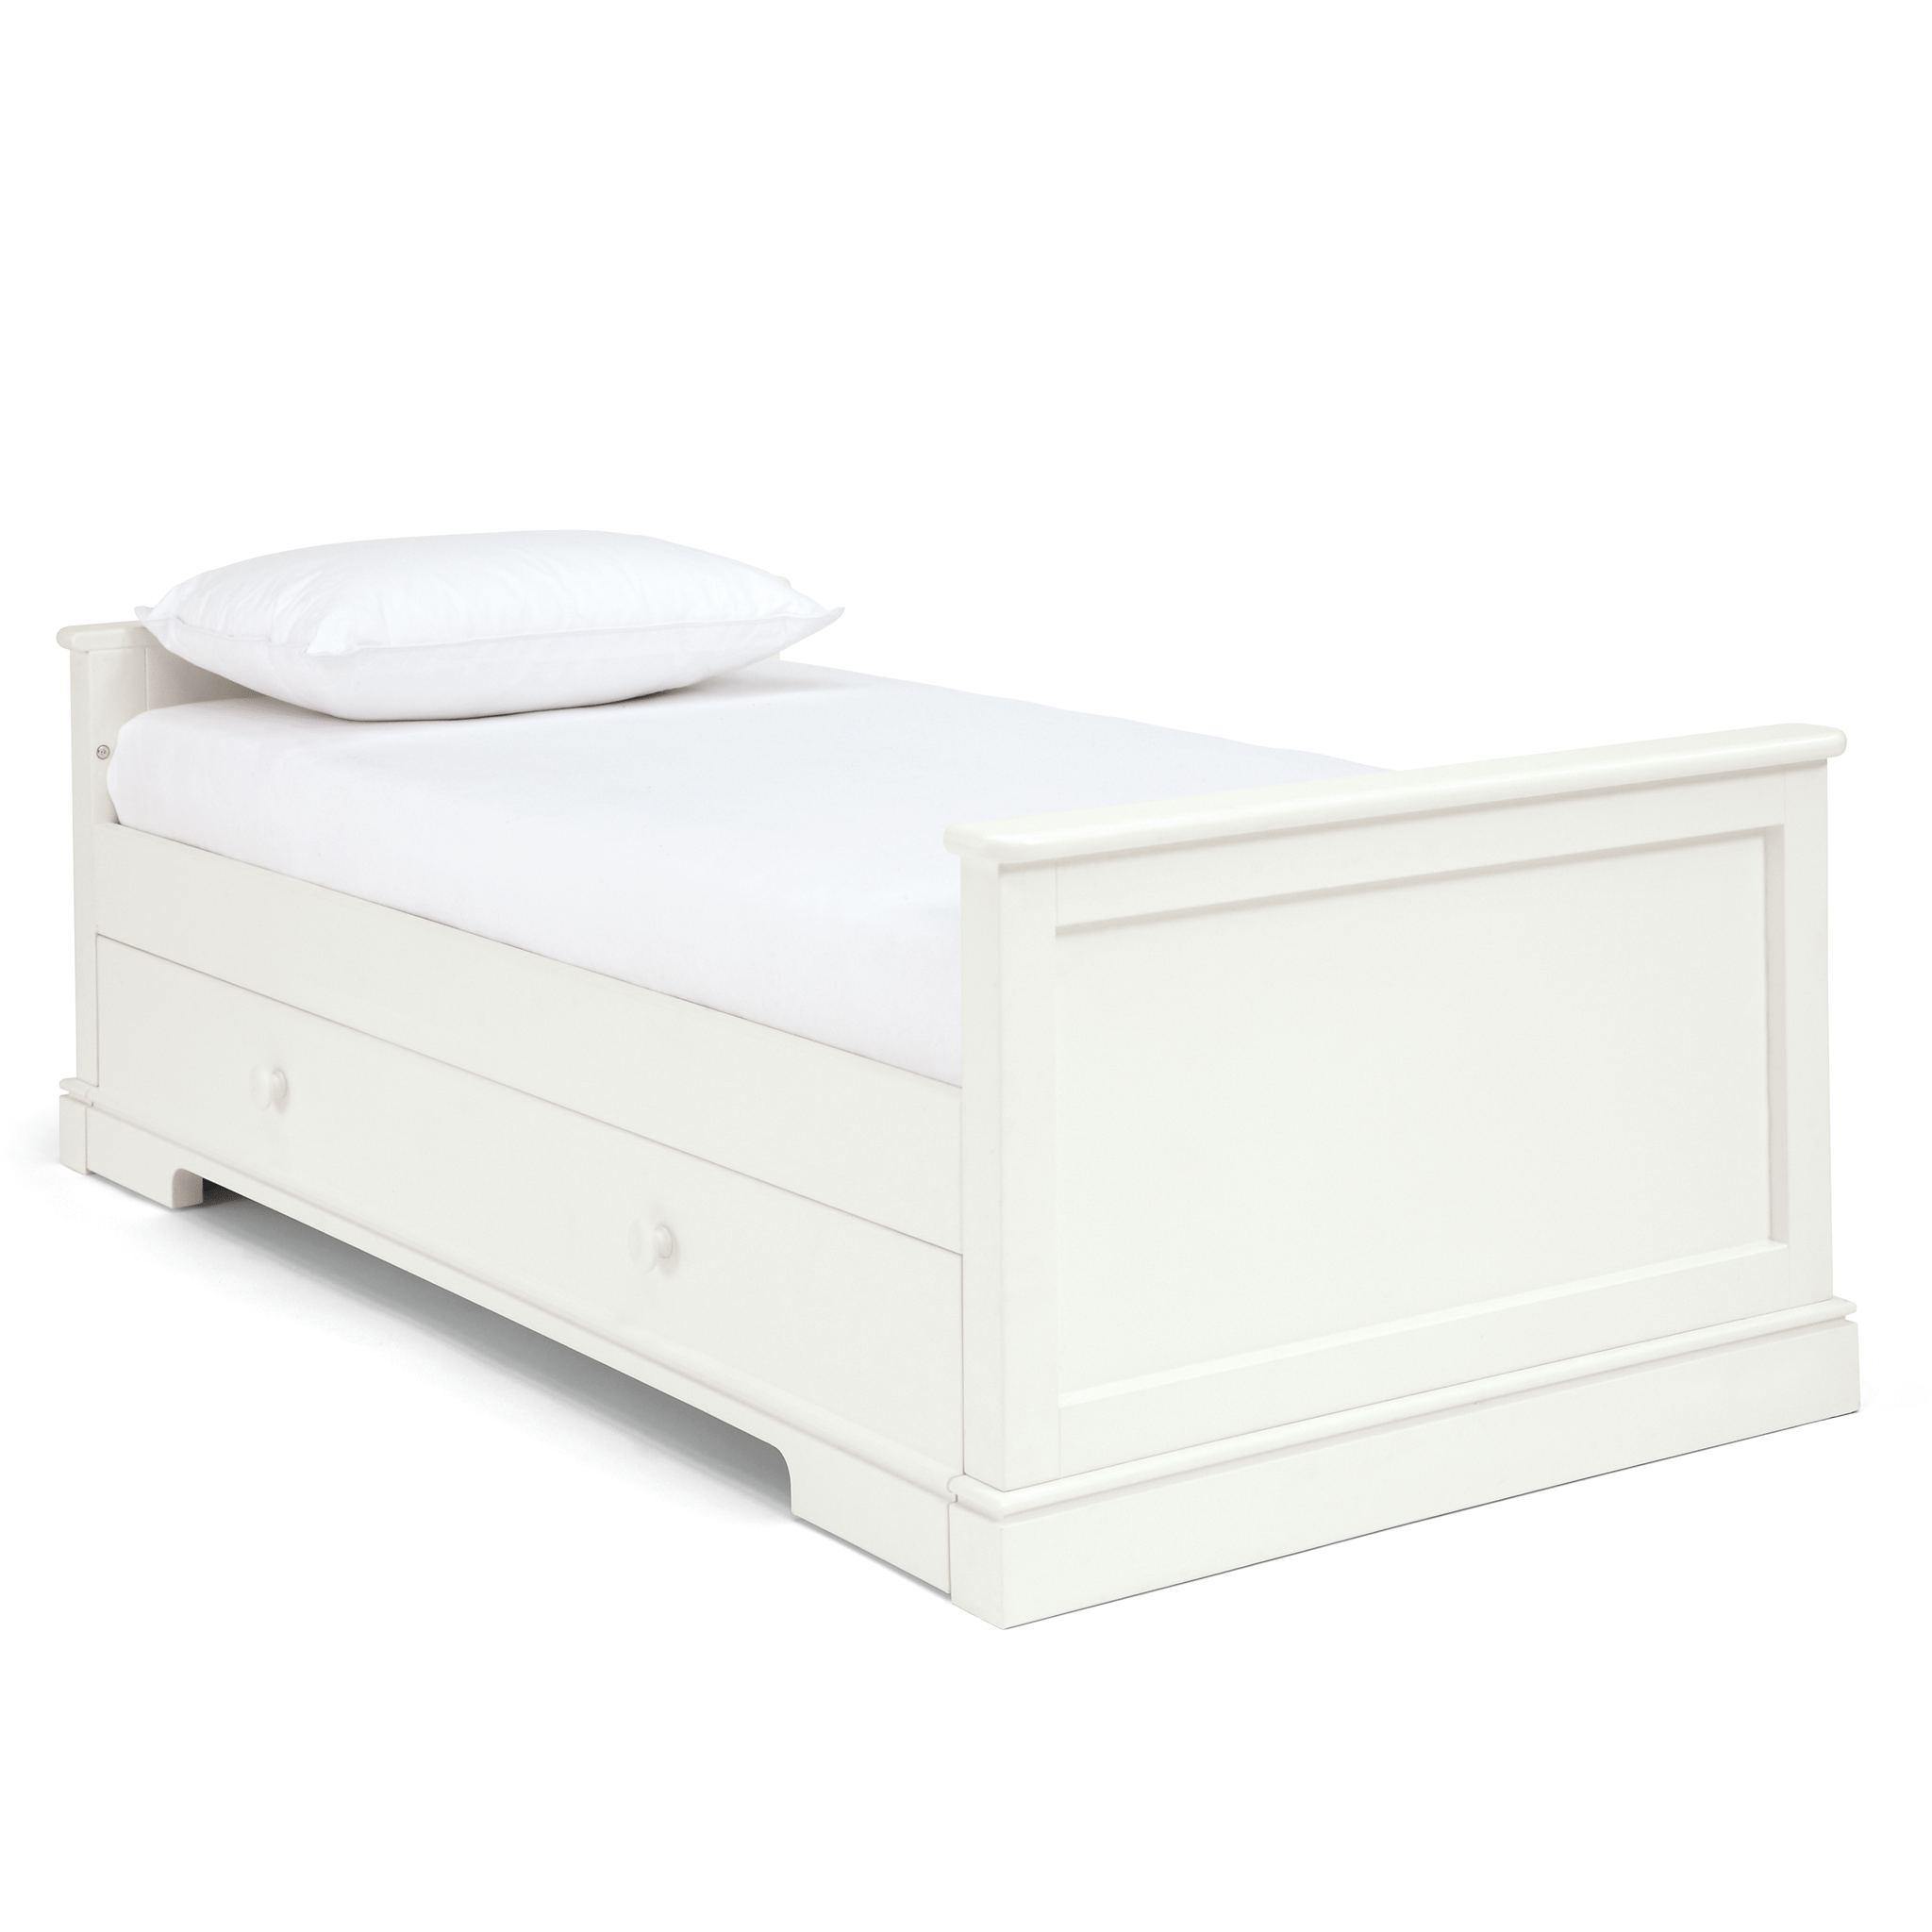 Mamas & Papas Oxford 2 Piece Cotbed Roomset White